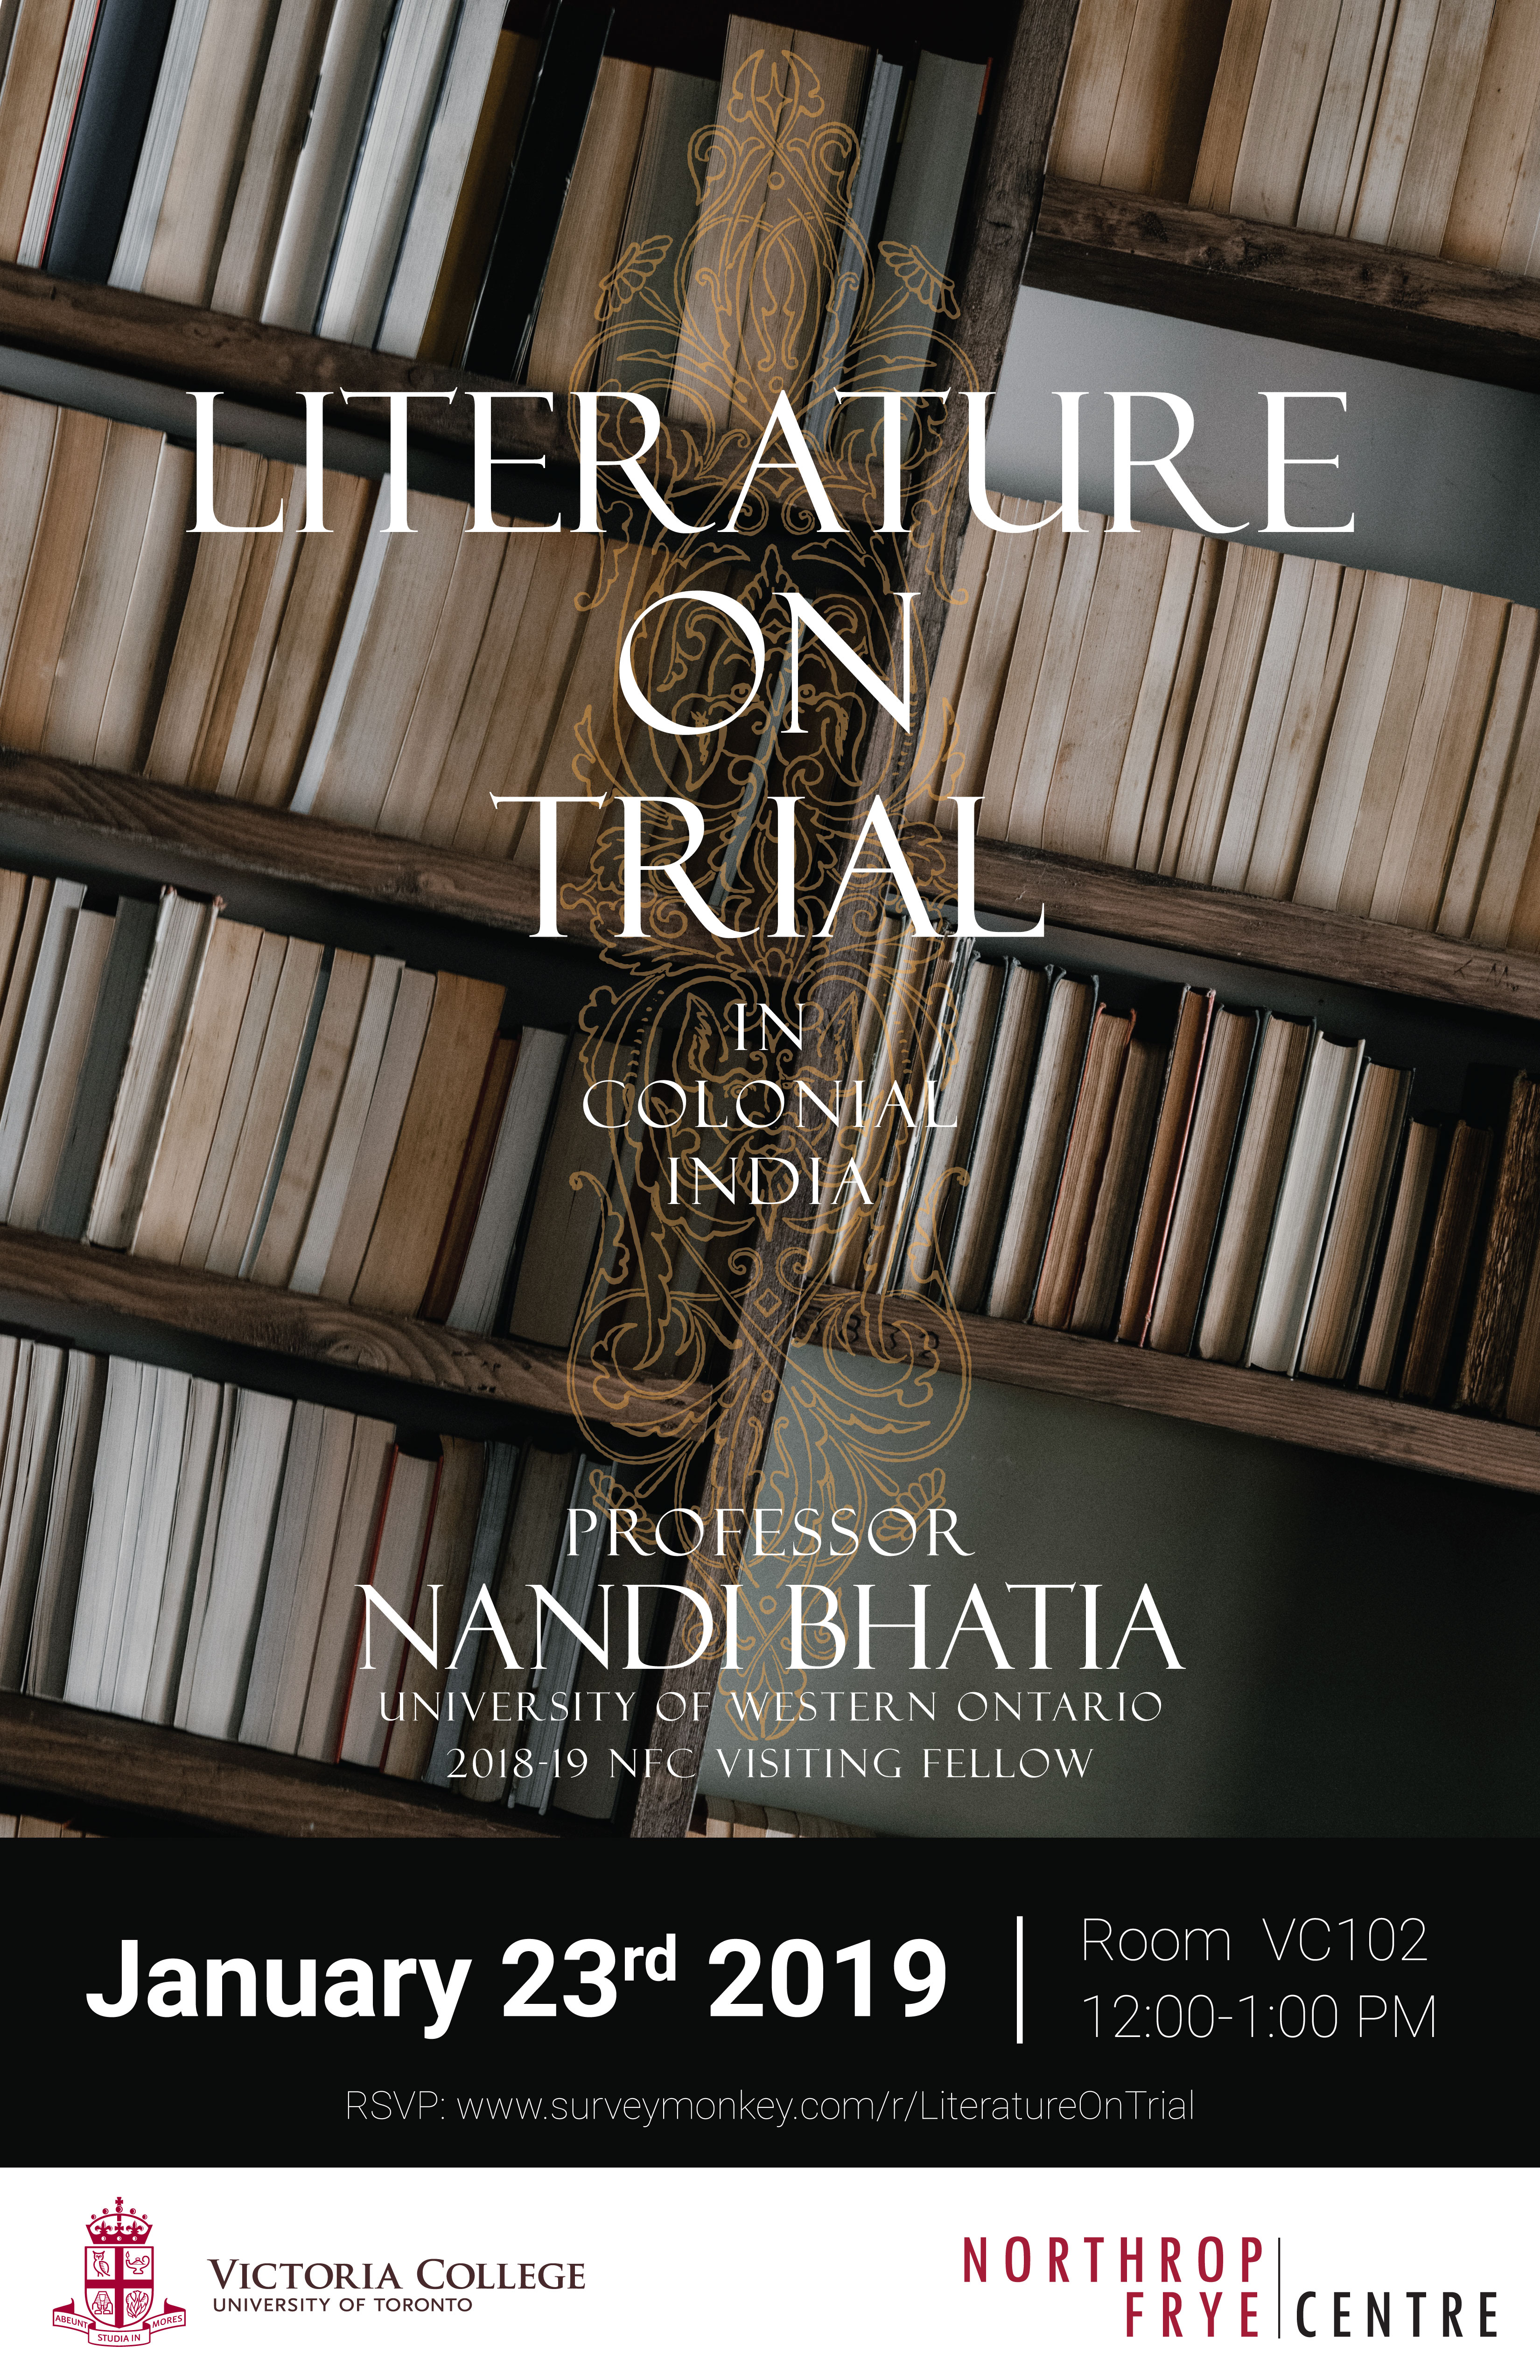 Jan. 23, 2019 | Literature on Trial in Colonial India | Nandi Bhatia